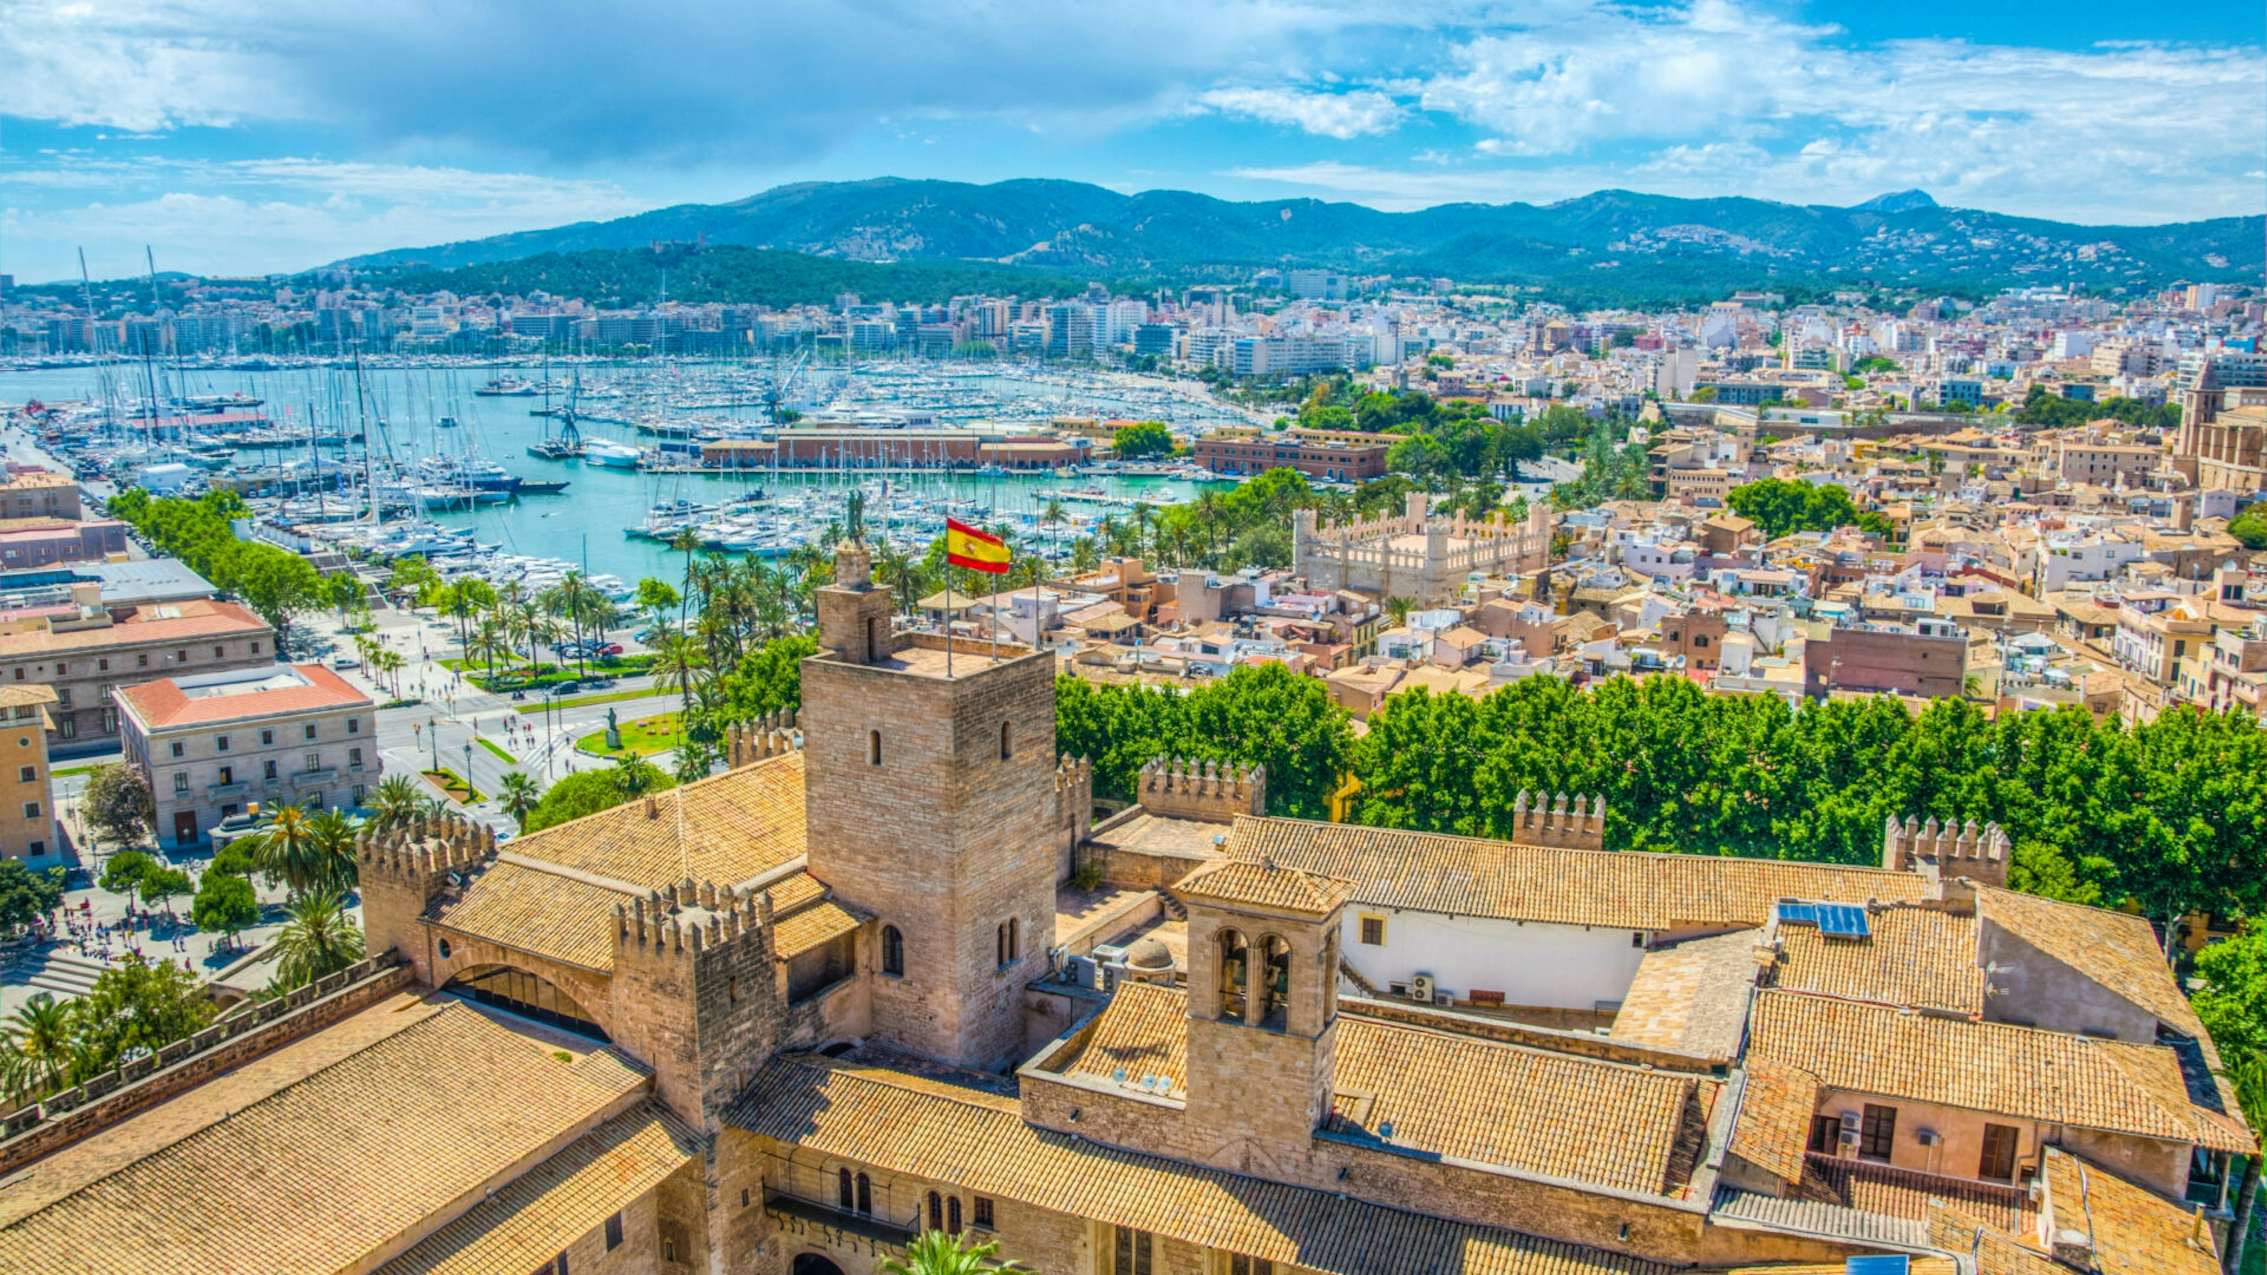 A panoramic aerial view of Palma de Mallorca, showcasing historical landmarks, modern residences, the bustling port, and the sun-kissed coastline on a beautiful day.